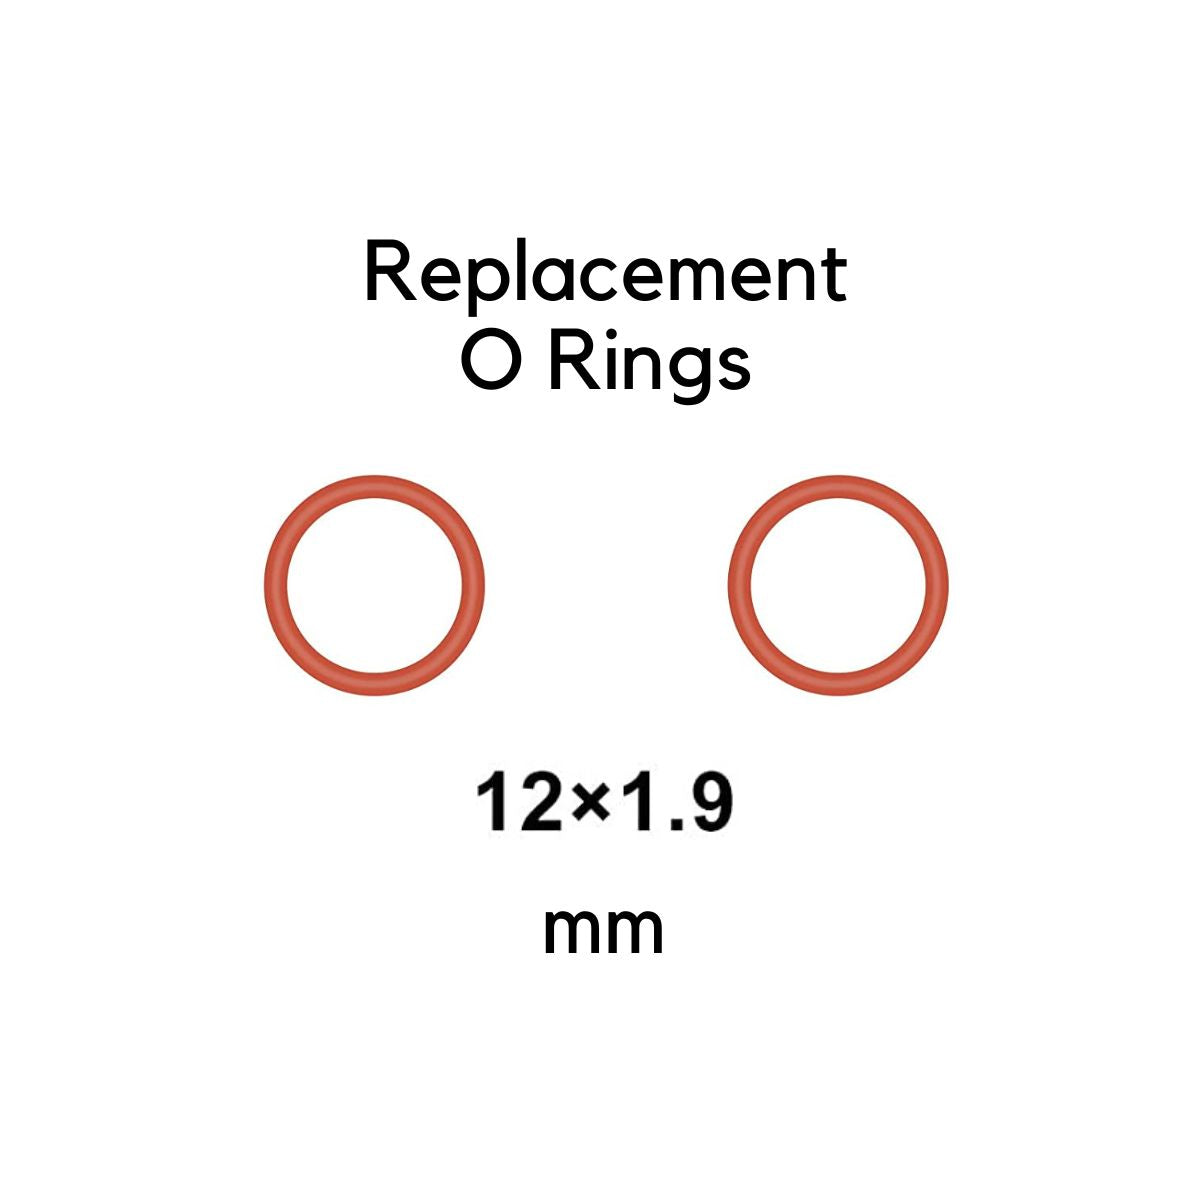 Replacement O Rings for Quick Connector Tube / Bite Valve of Hydration Reservoir